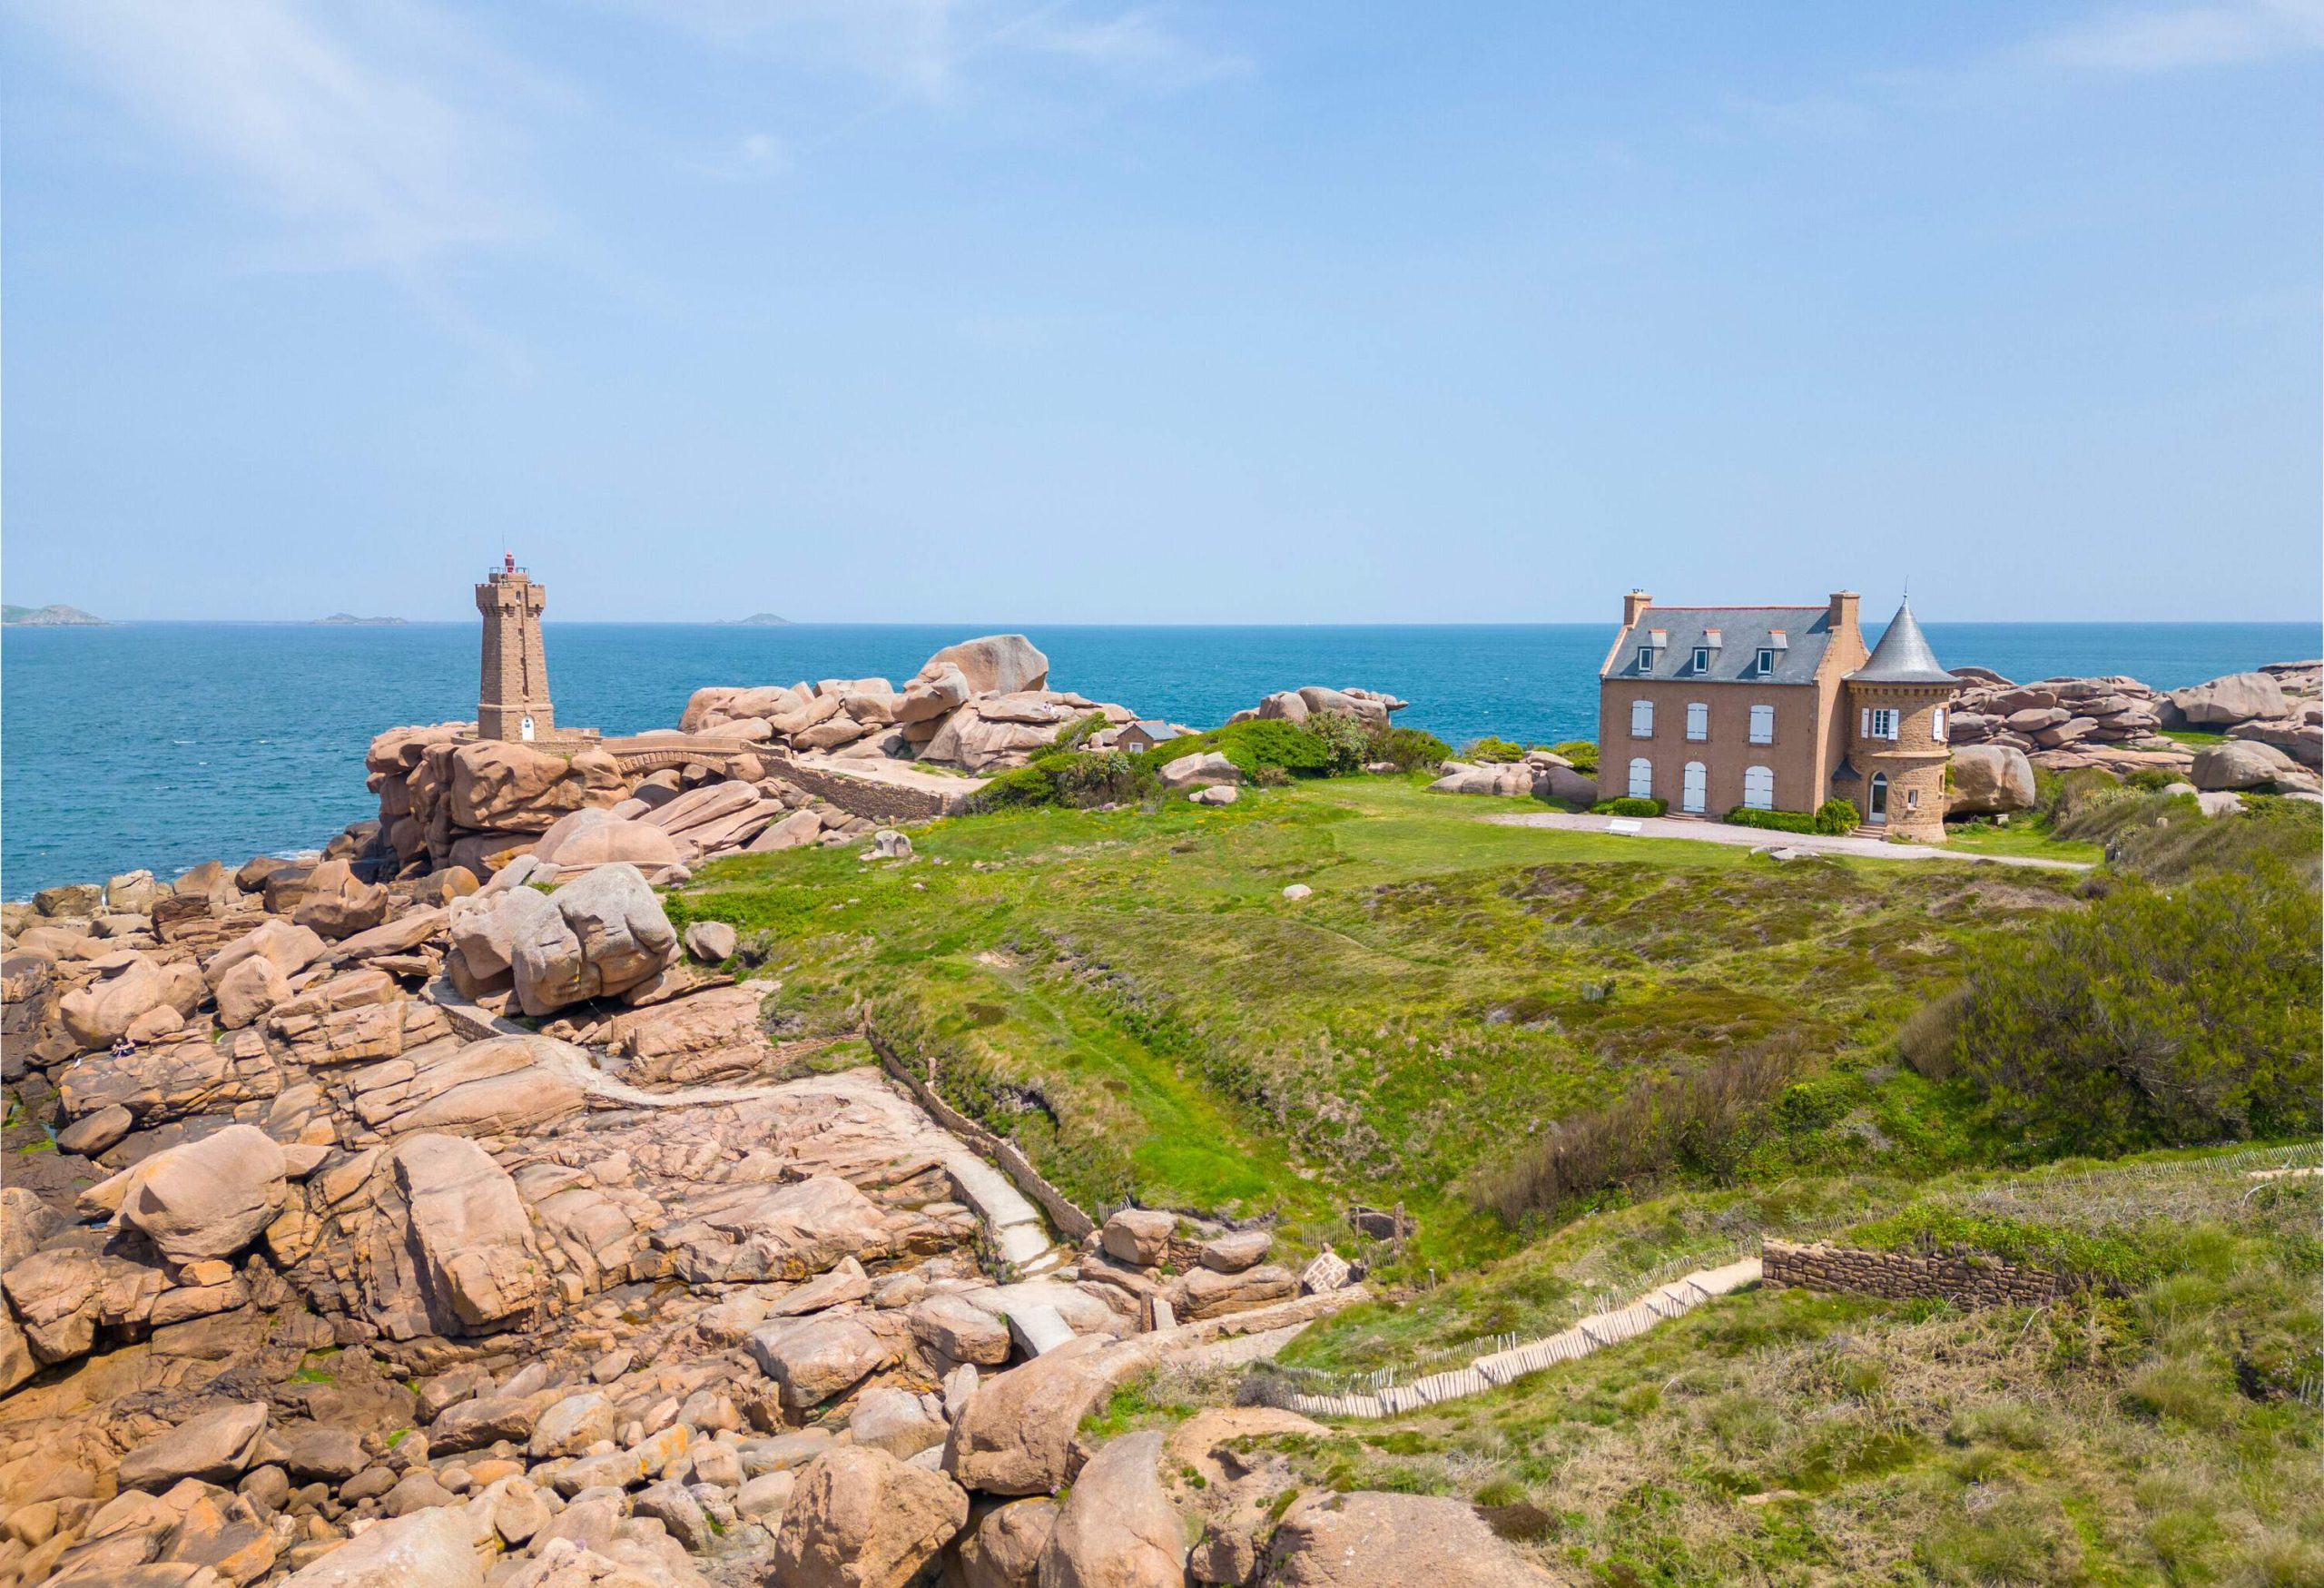 View of ruggedcoastal landscape with pink granite, a lighthouse and castle by the sea